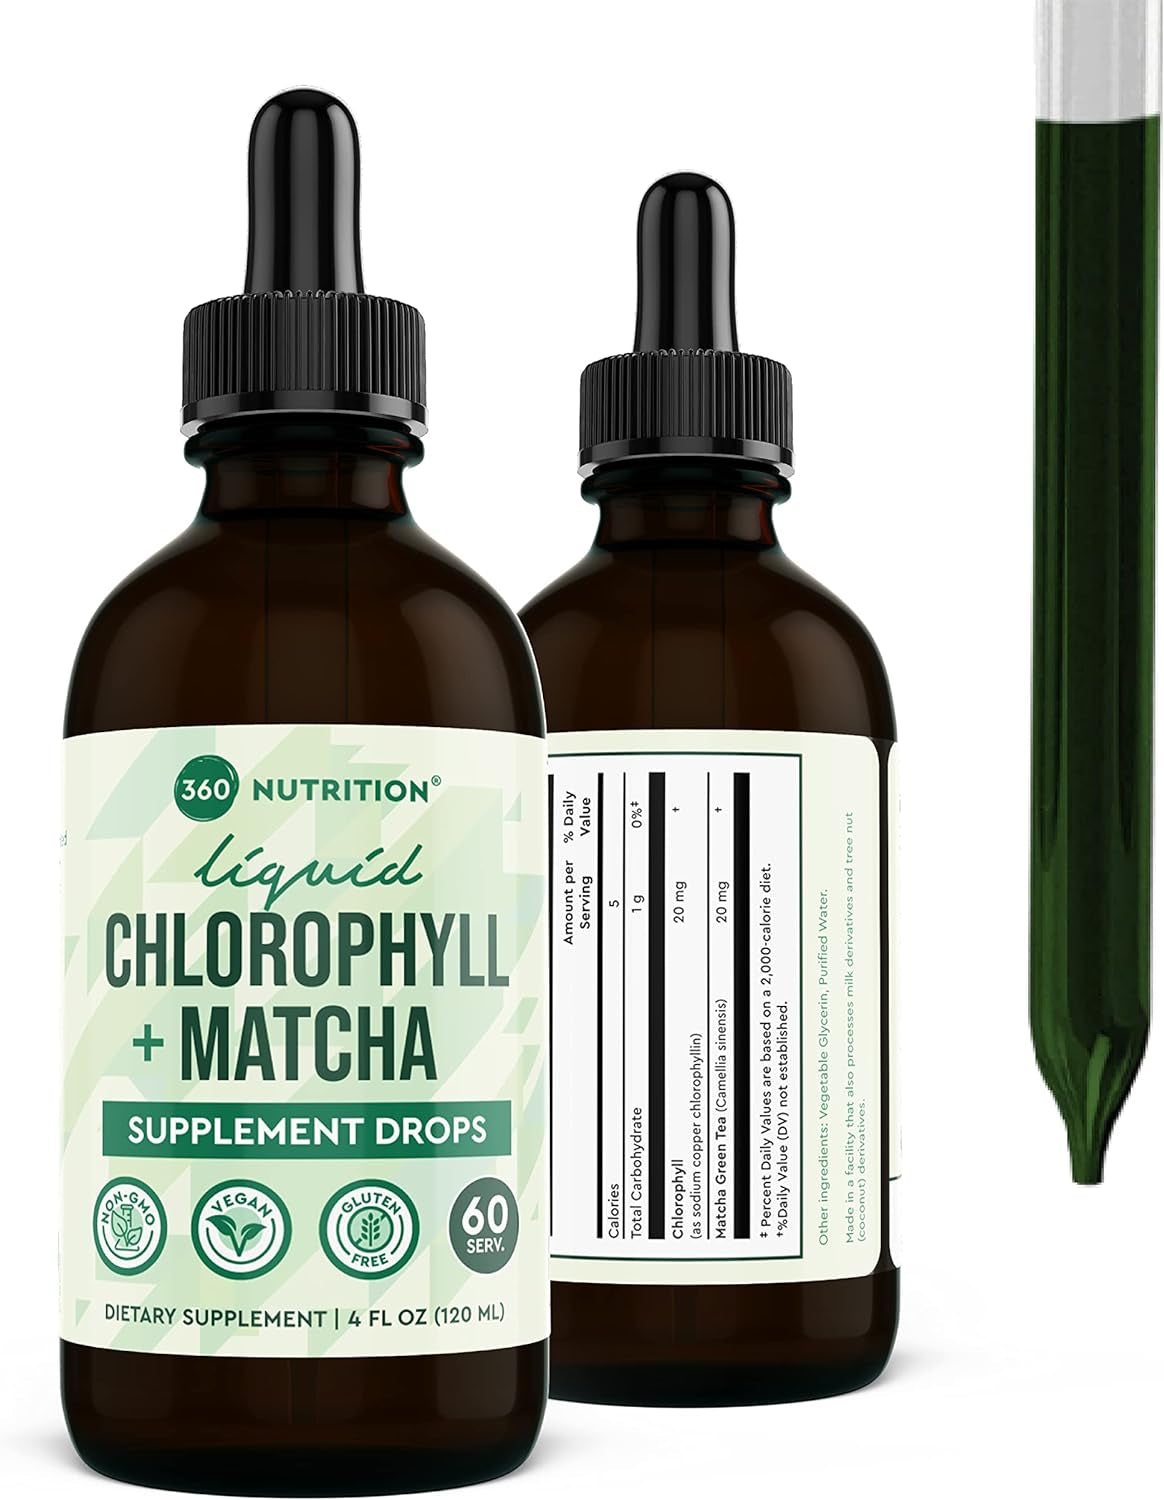 "Radiant Gut Health: Matcha Chlorophyll Liquid Drops with L-Theanine for Energy & Skin, Vegan & Gluten-Free, Fast Absorption - 60 Servings"